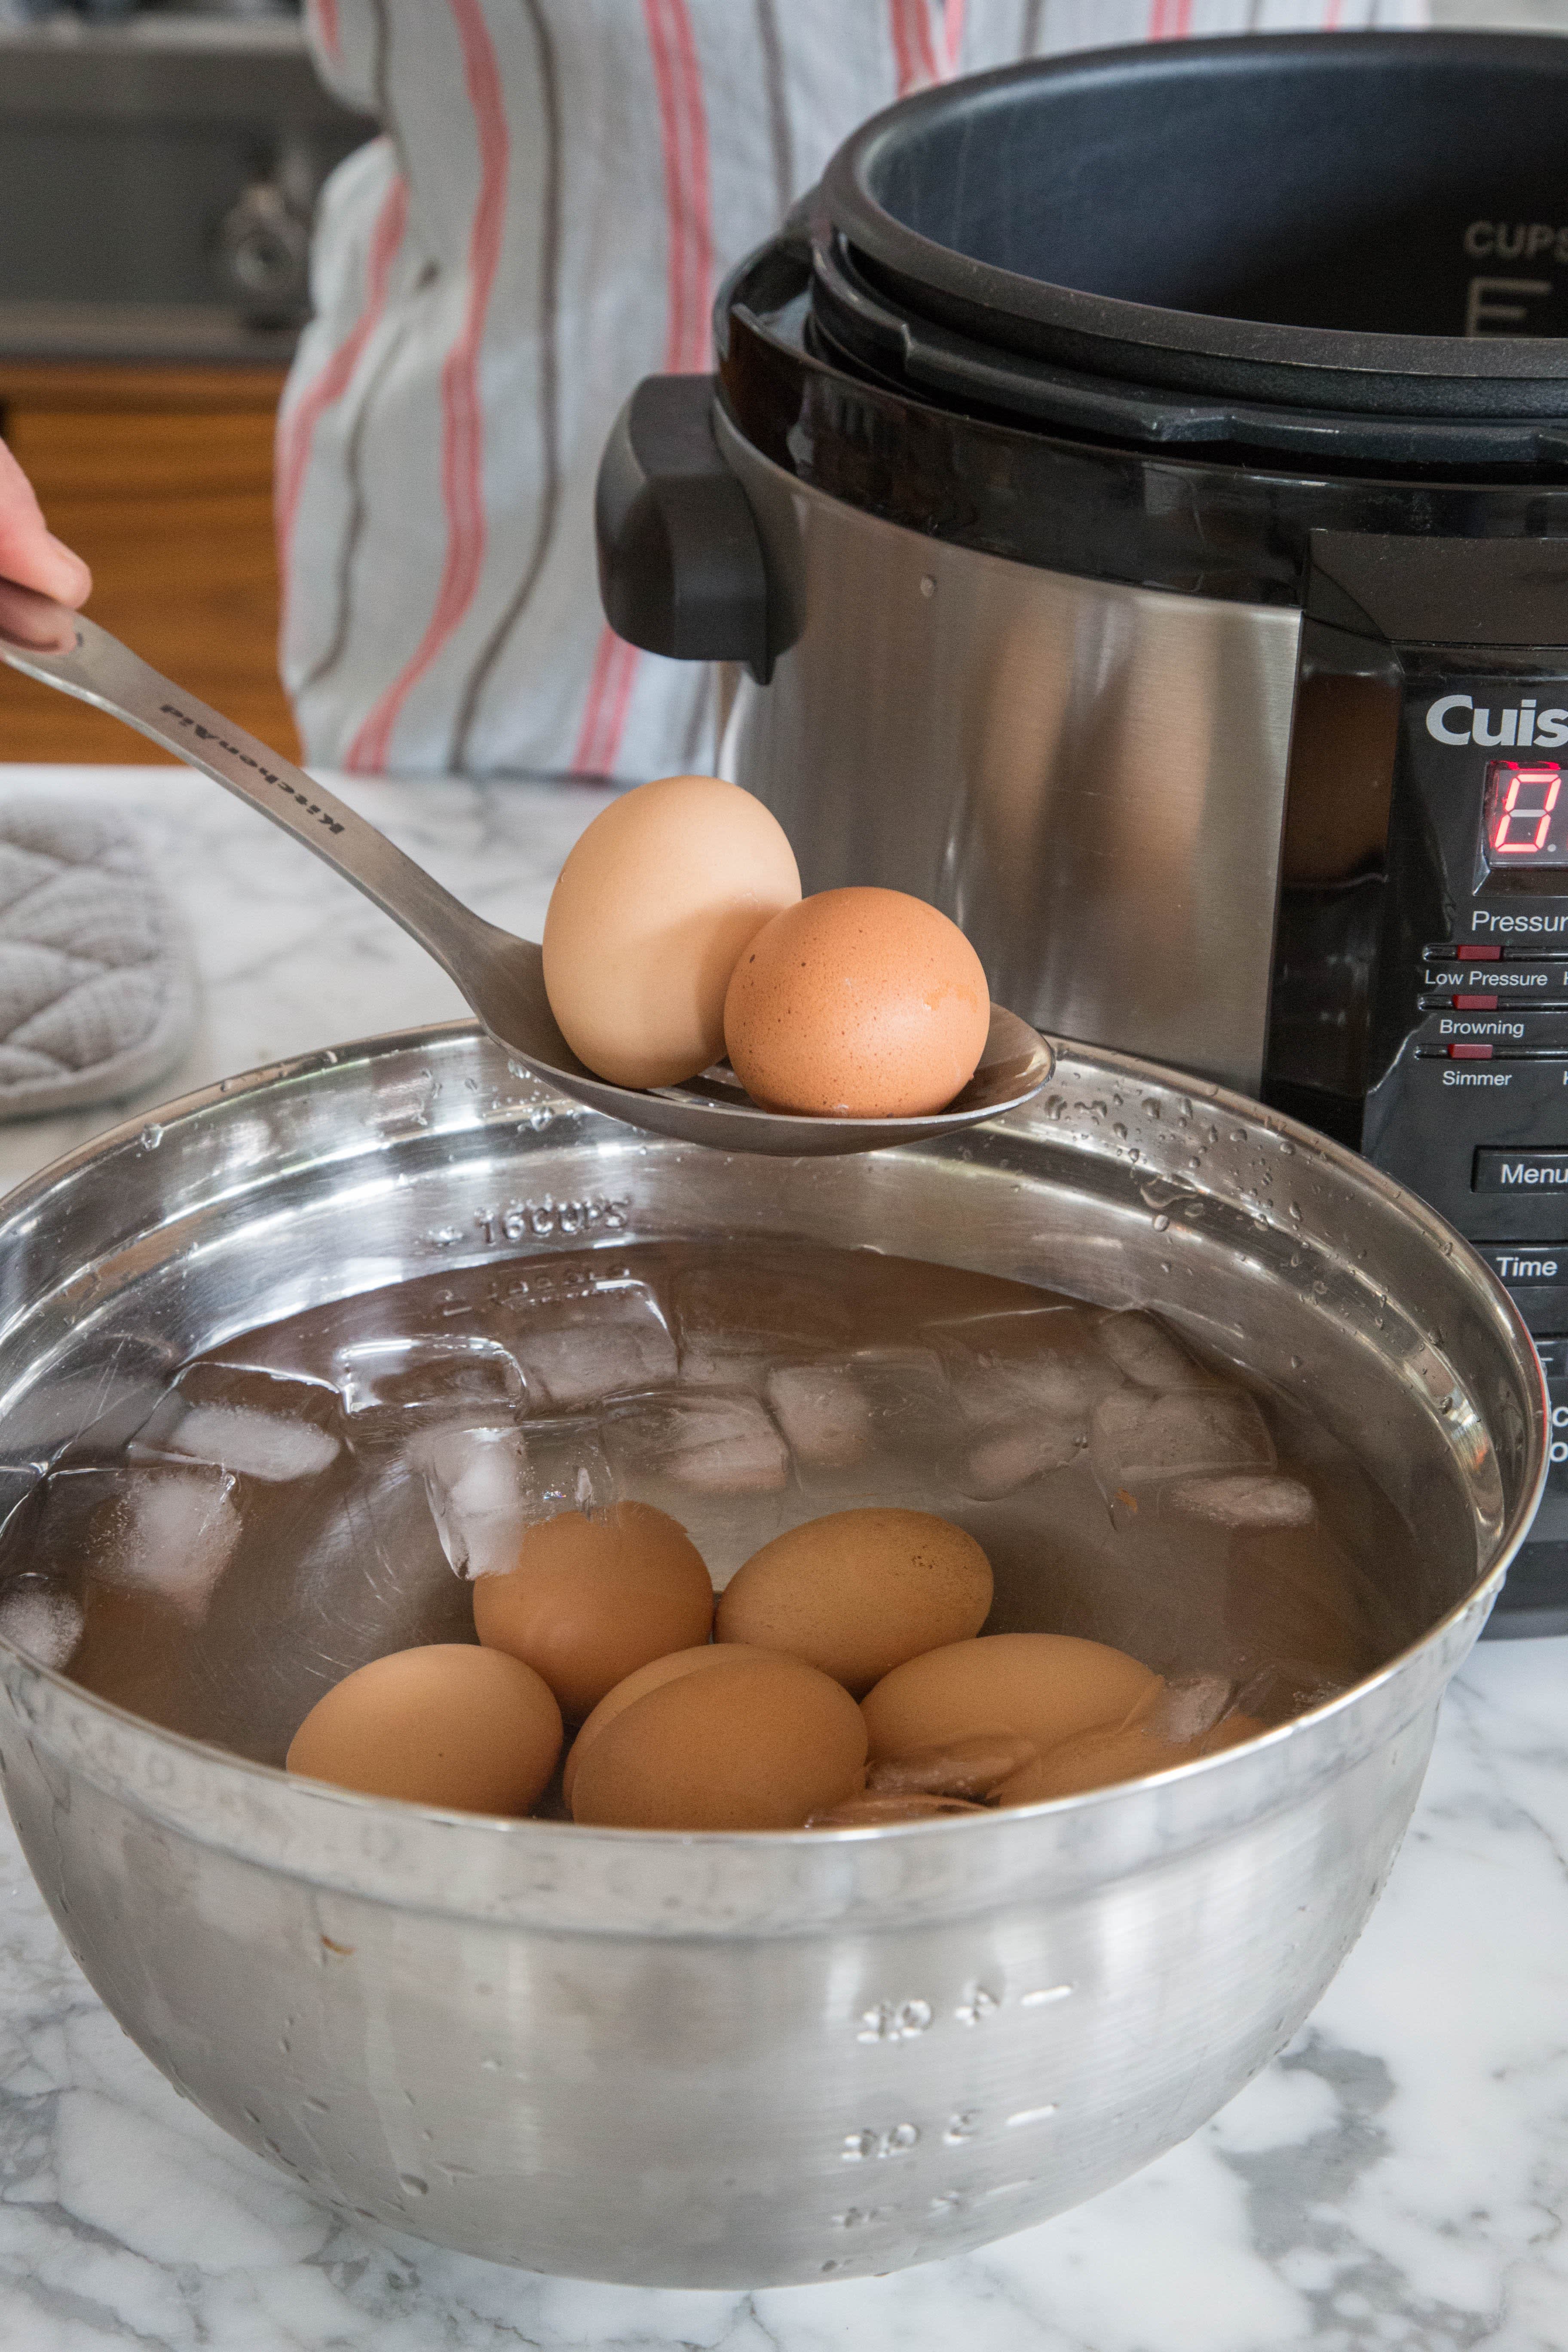 How To Cook Eggs in an Electric Pressure Cooker